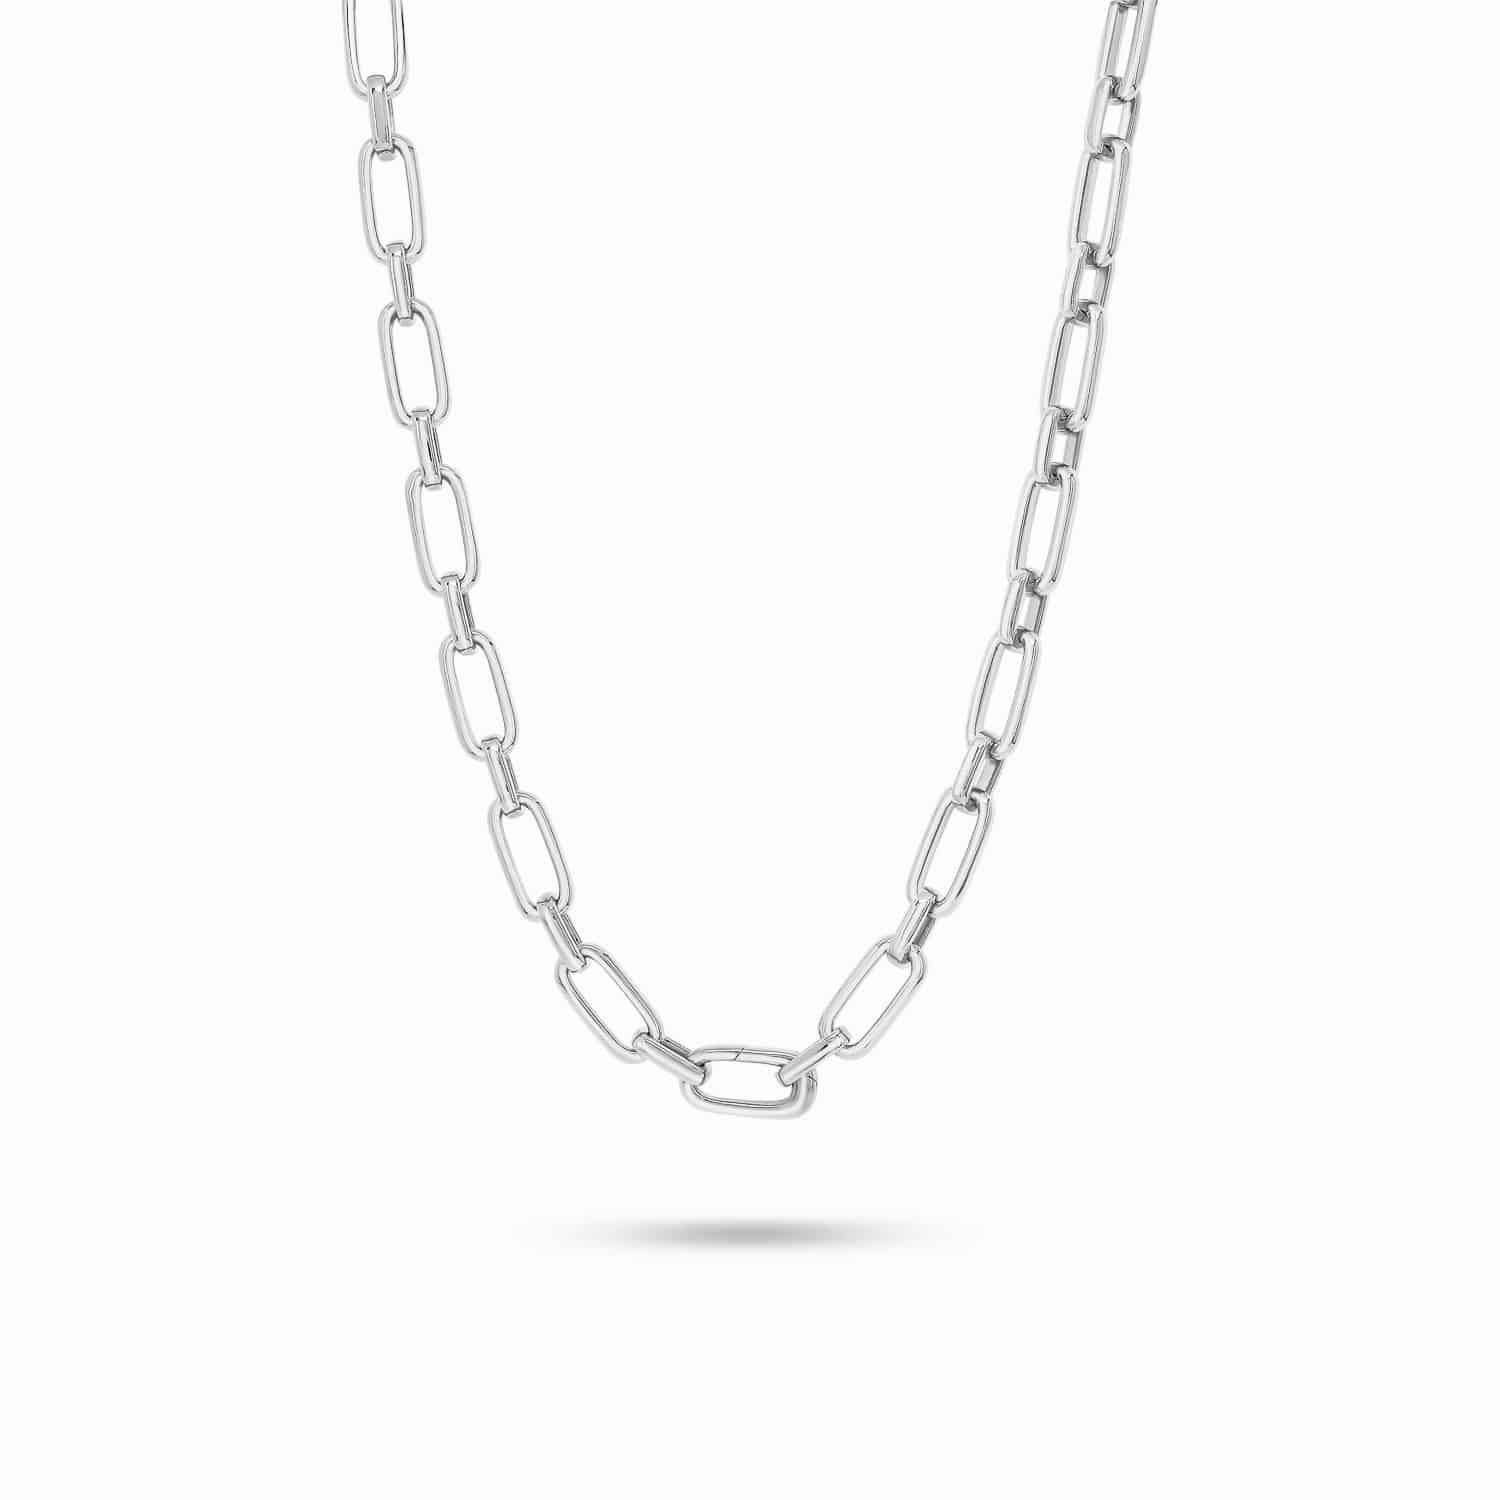 LVC Carla Commix Chain Necklace in 925 Sterling Silver Jewellery